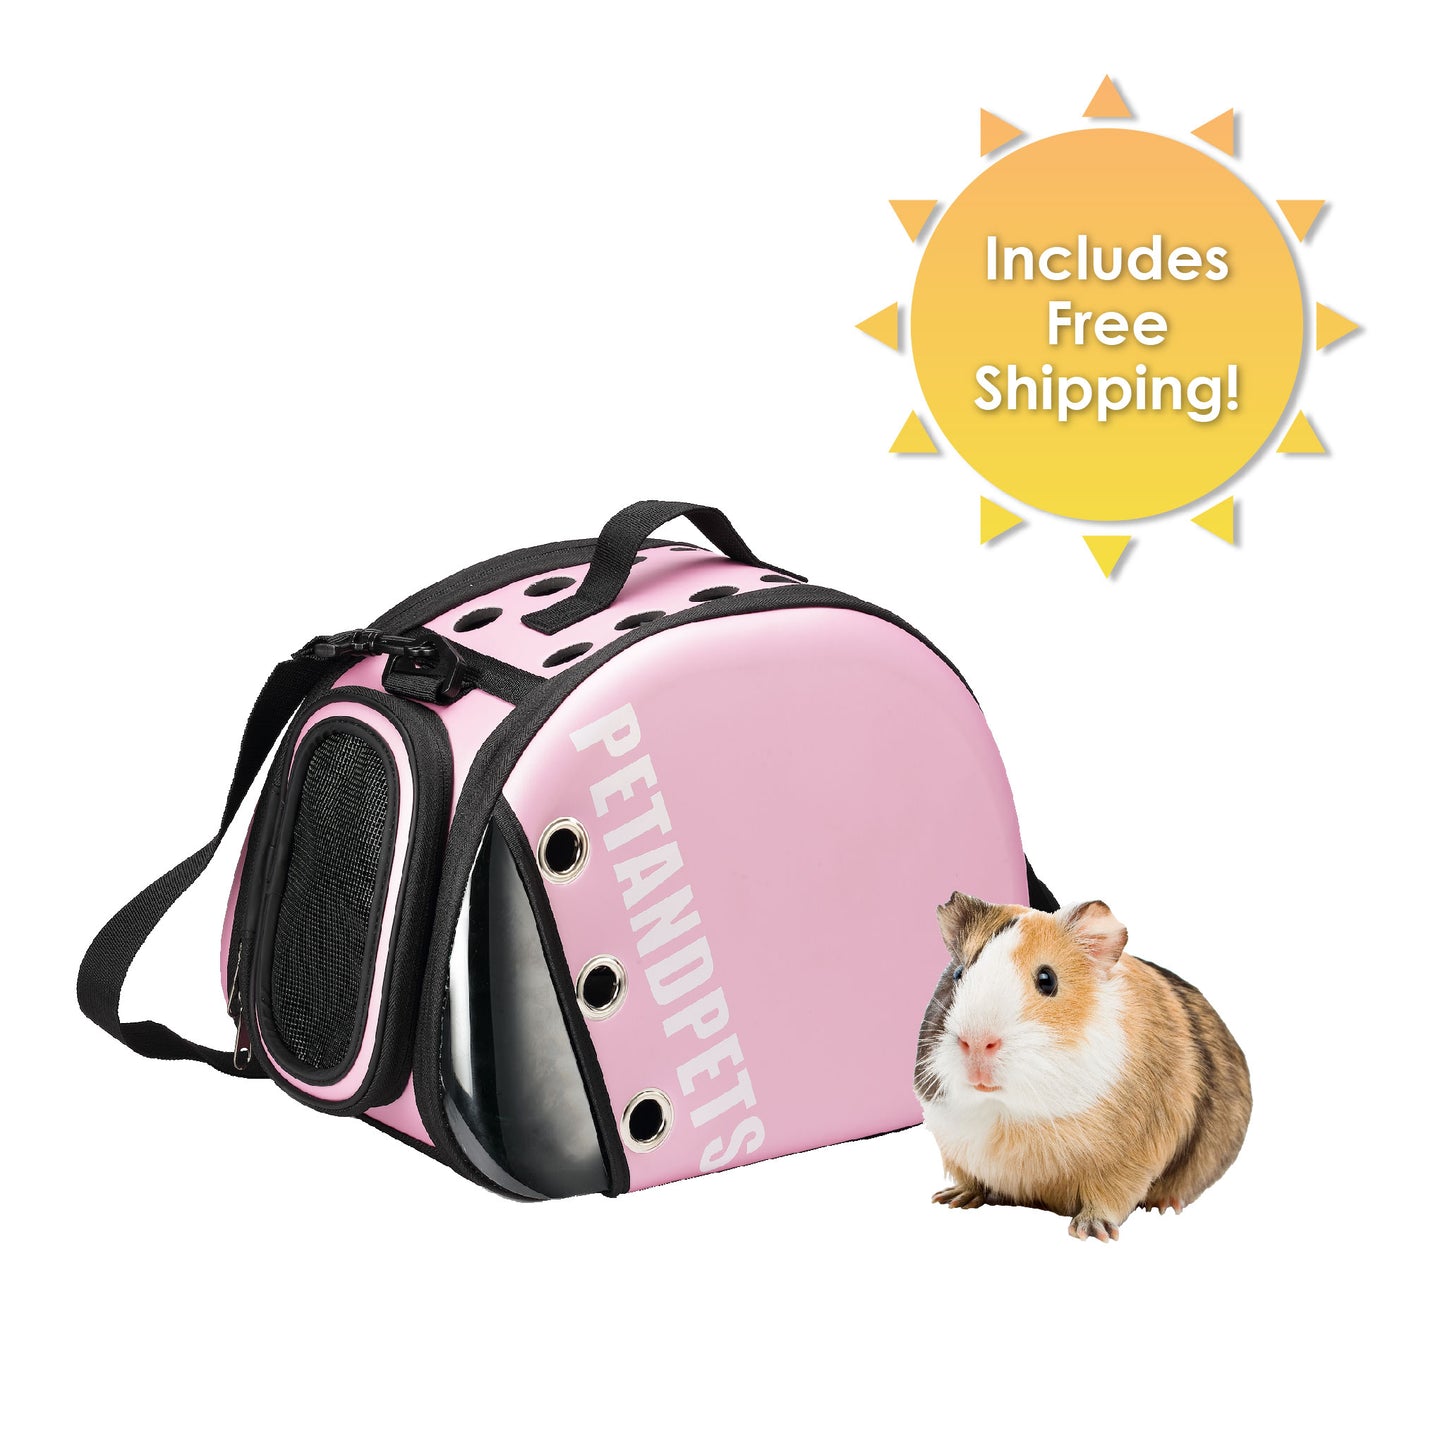 Macaron Pet Carrier: Optimal Airflow, Quality Mesh Windows, Peek-a-Boo Window, Collapsible, Adjustable Strap, Supports 25 LB